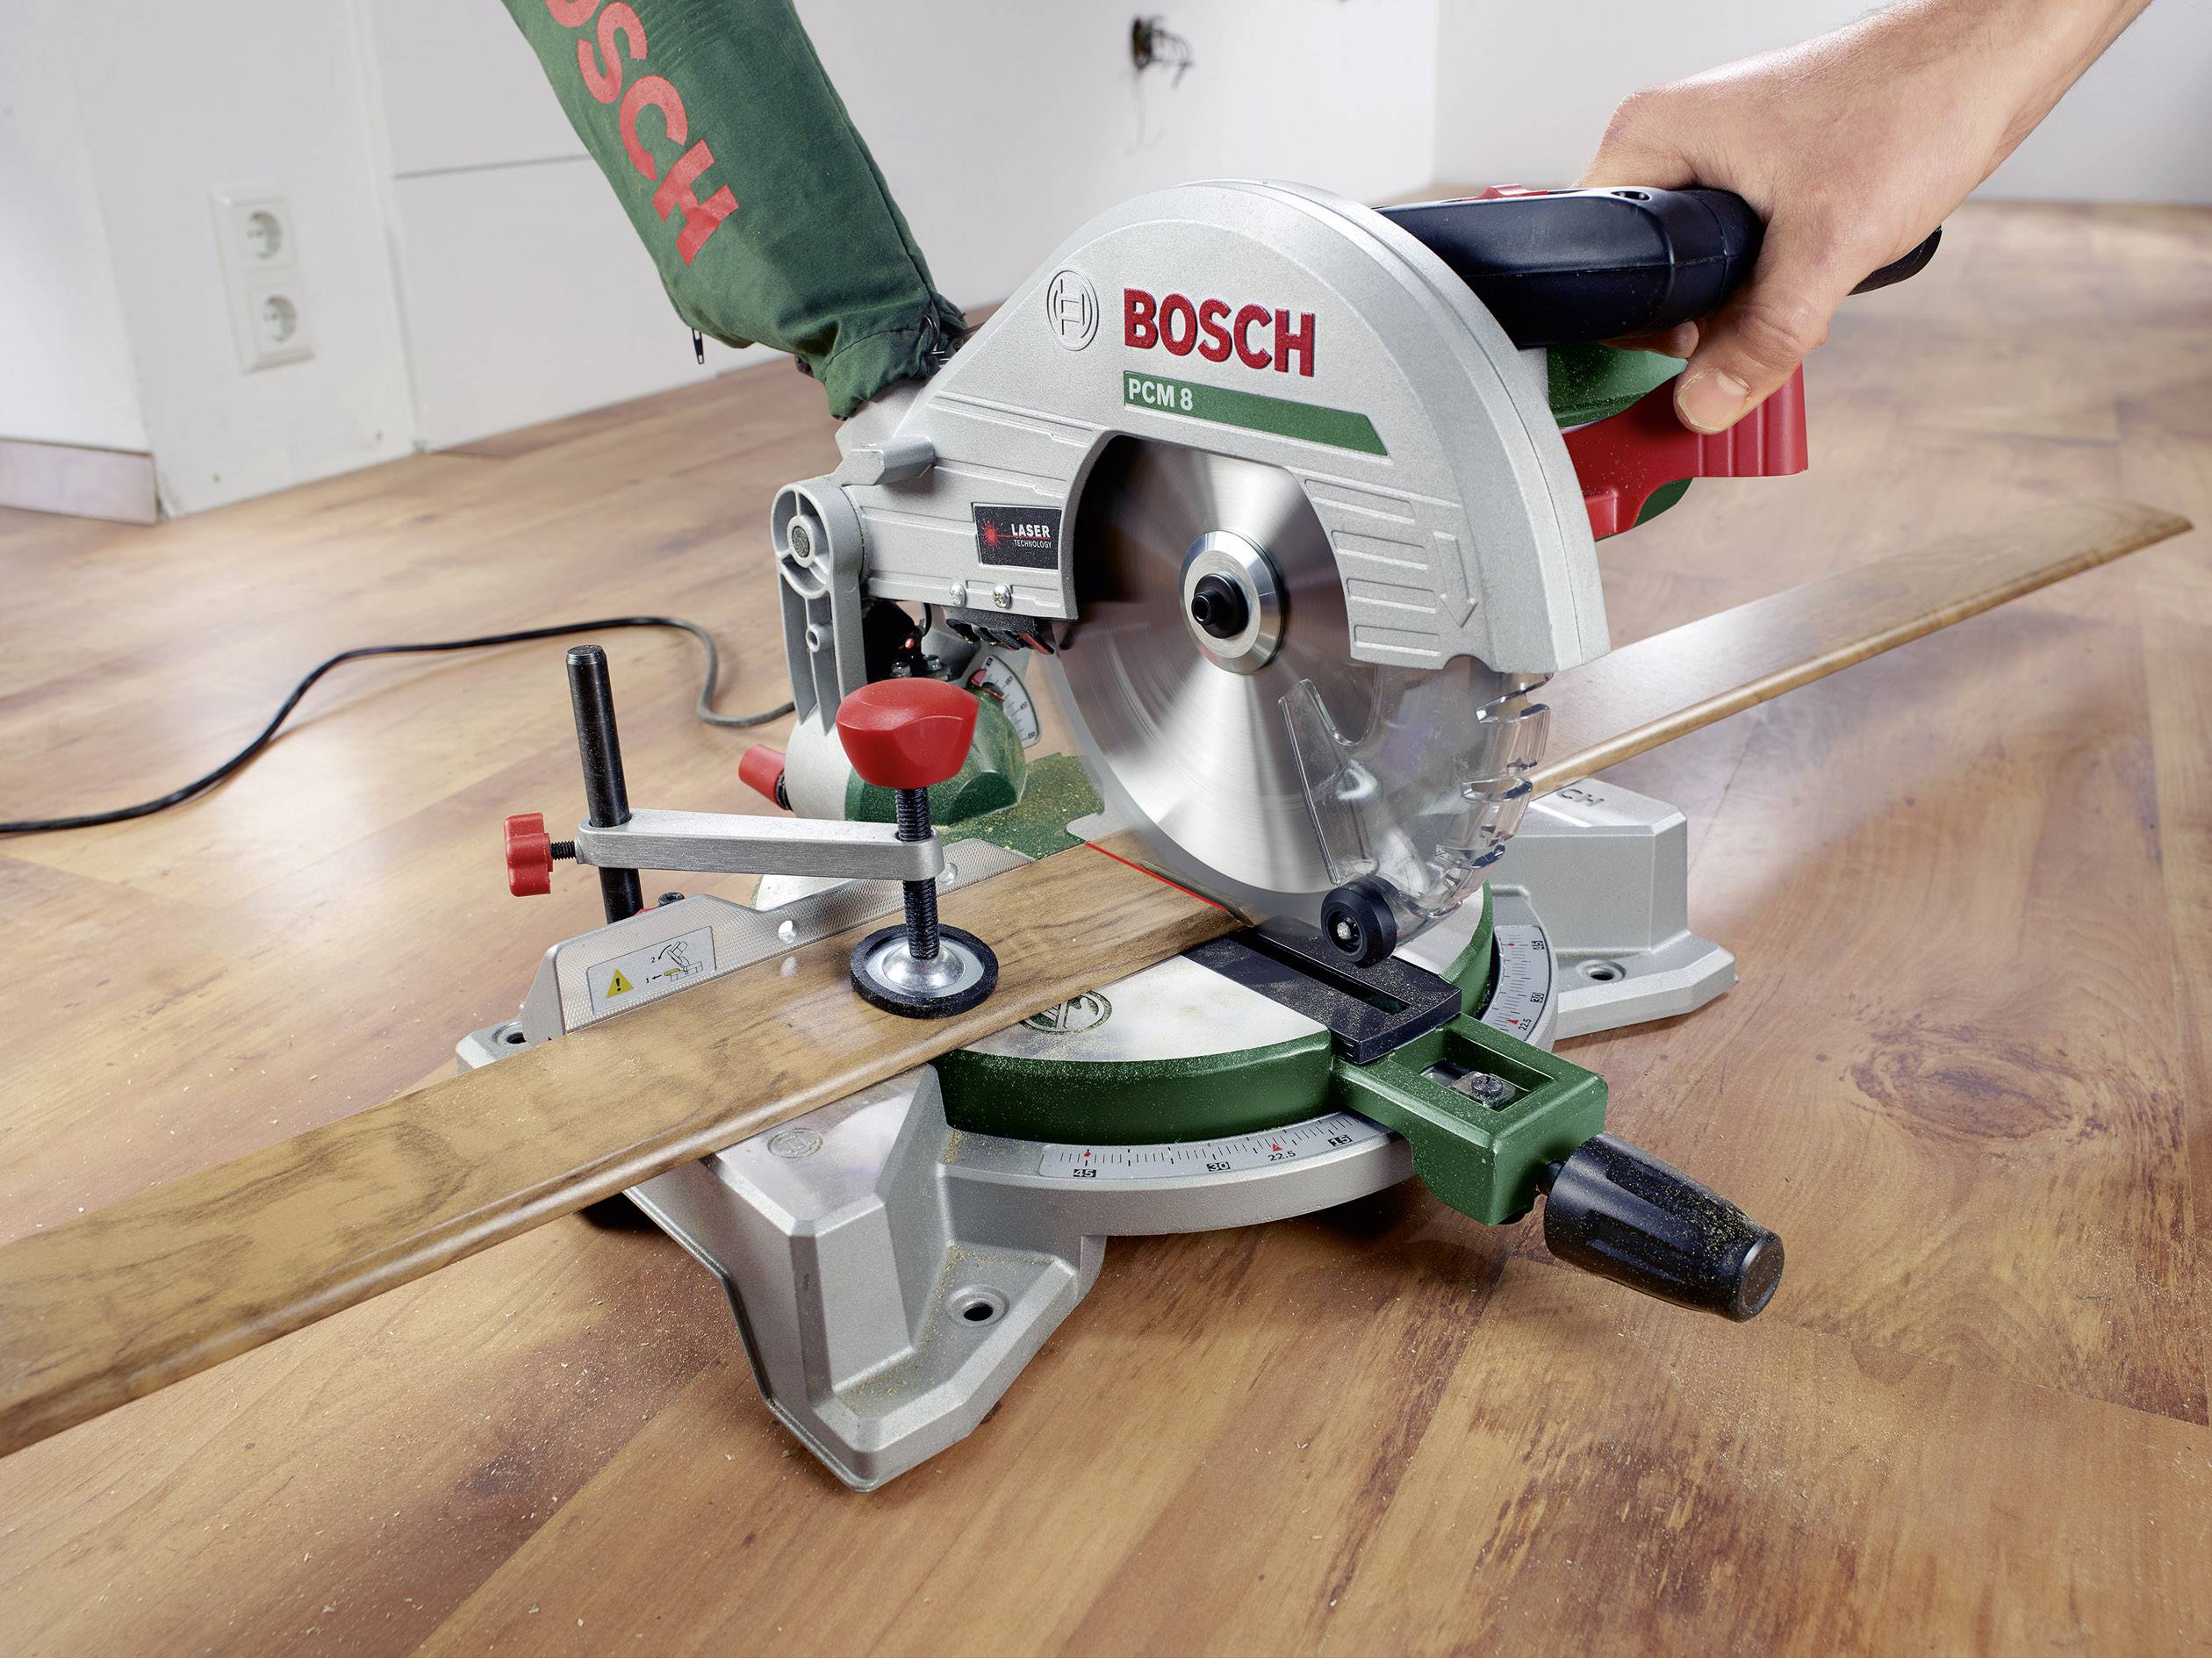 Vooruit Dwaal genoeg Bosch Home and Garden PCM 8 Chop and mitre saw 216 mm 30 mm 1200 W |  Conrad.com